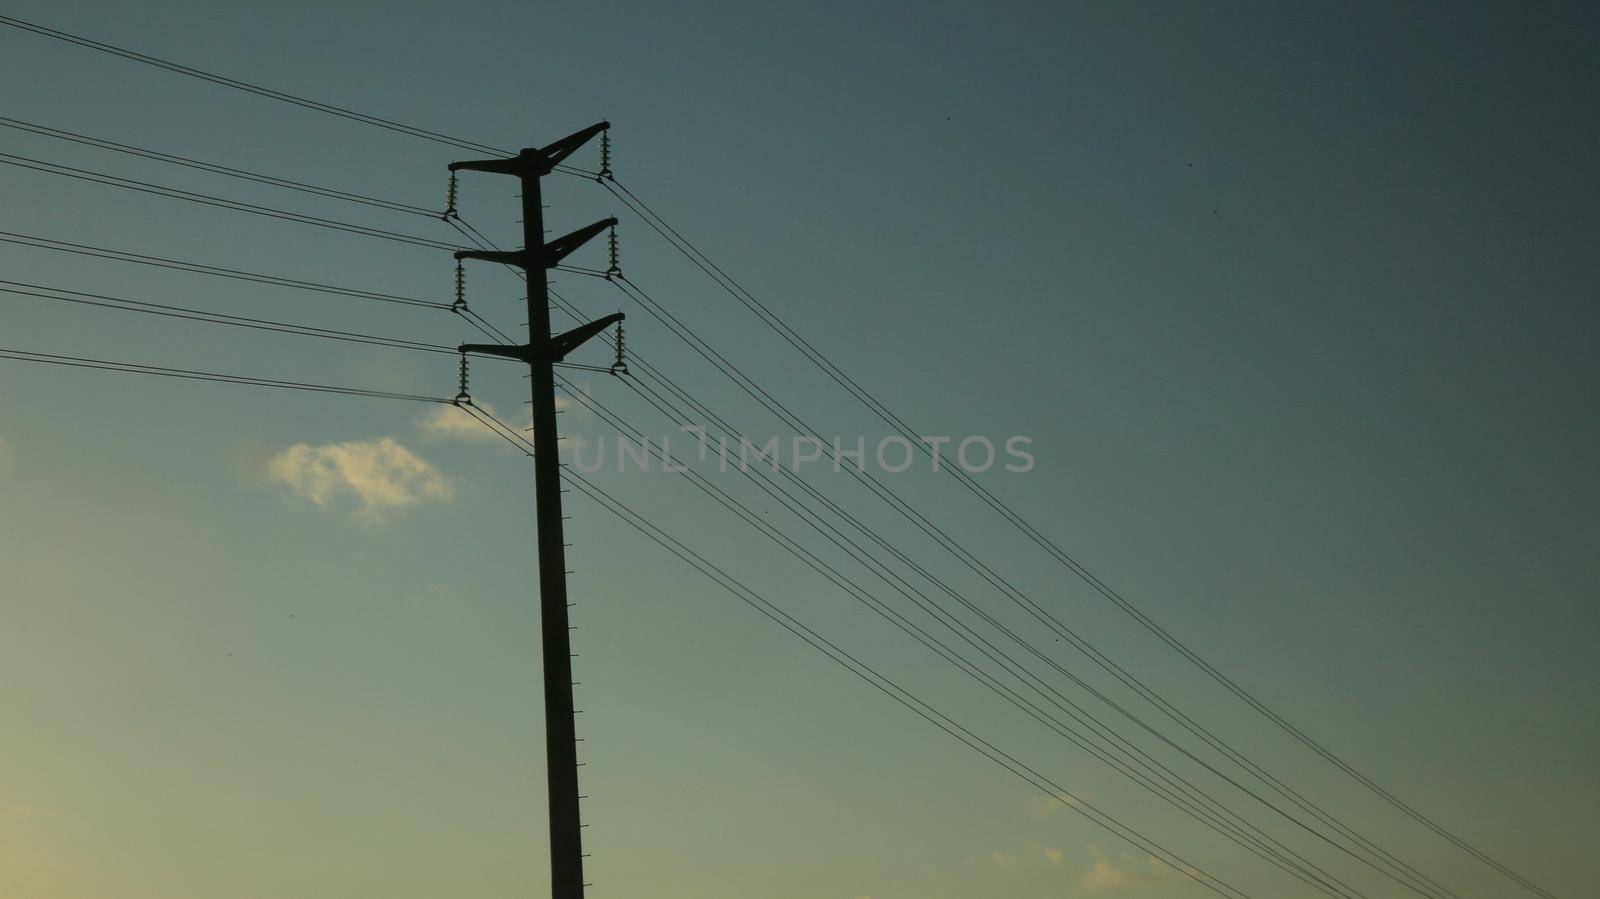 camacari, bahia / brazil - september 27, 2020: tower are joined together with electric power transmission lines are seen in substation in the city of Camacari.